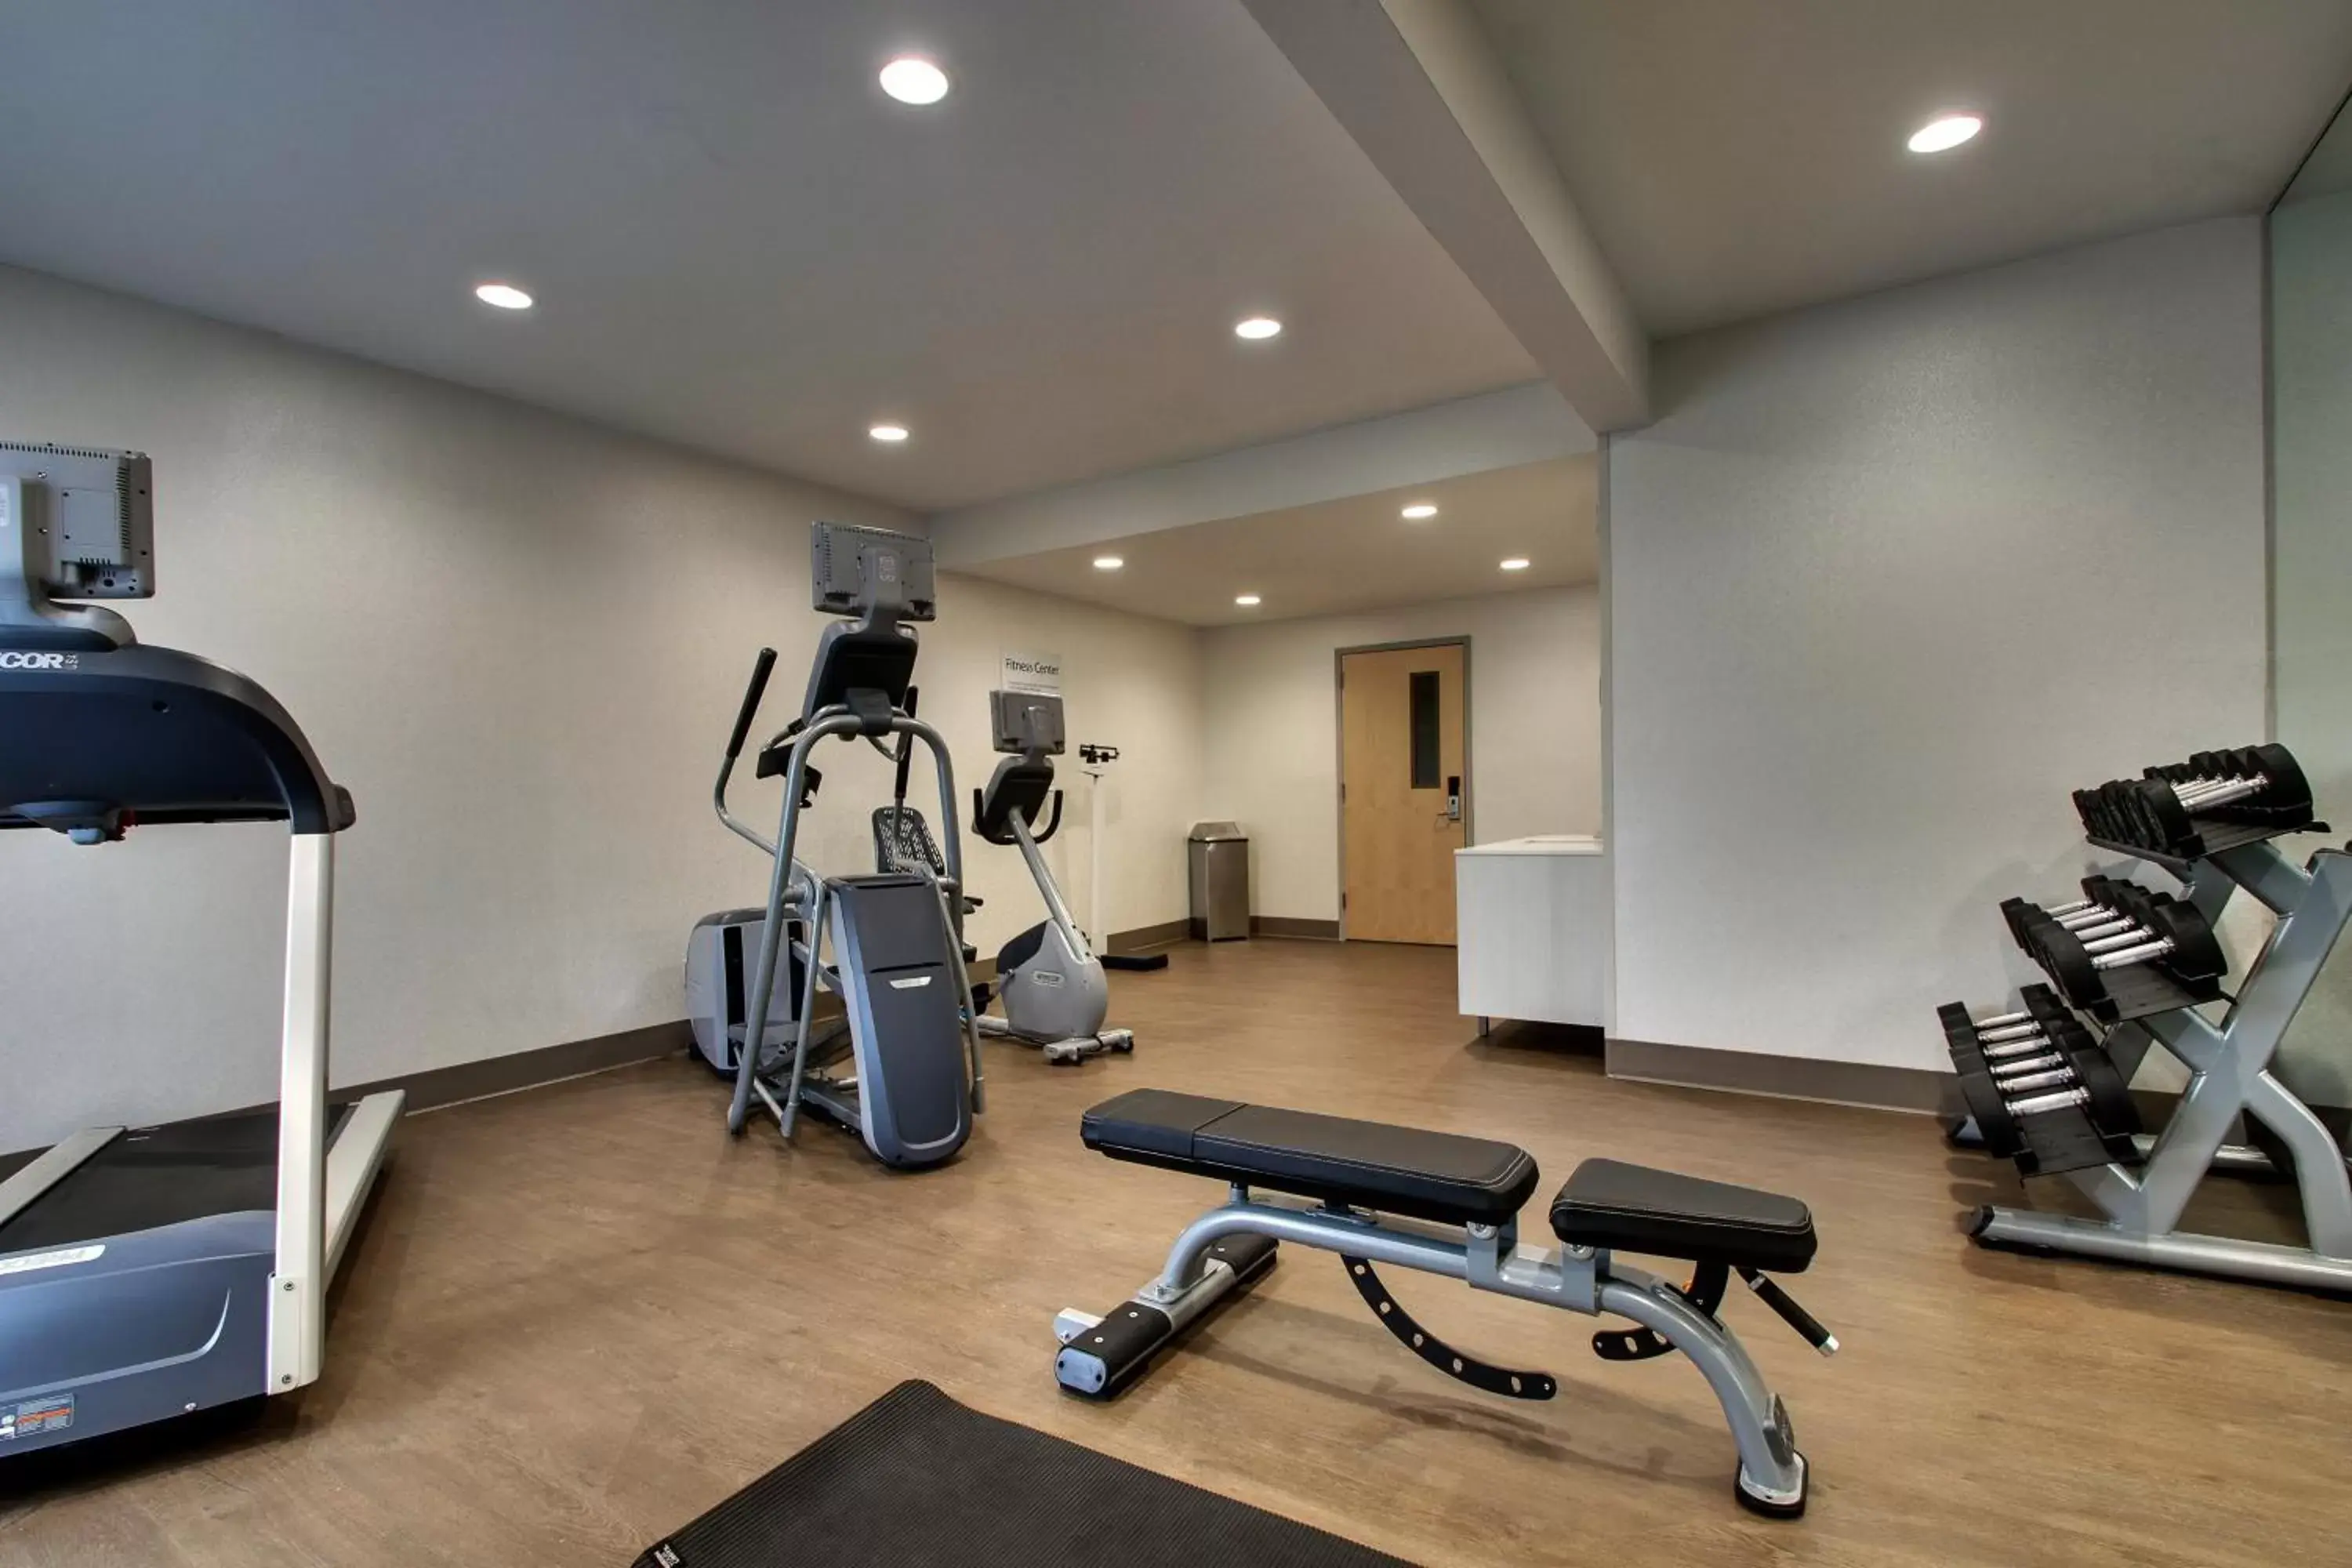 Fitness centre/facilities, Fitness Center/Facilities in Holiday Inn Express Hotel & Suites Cedar Rapids I-380 at 33rd Avenue, an IHG Hotel